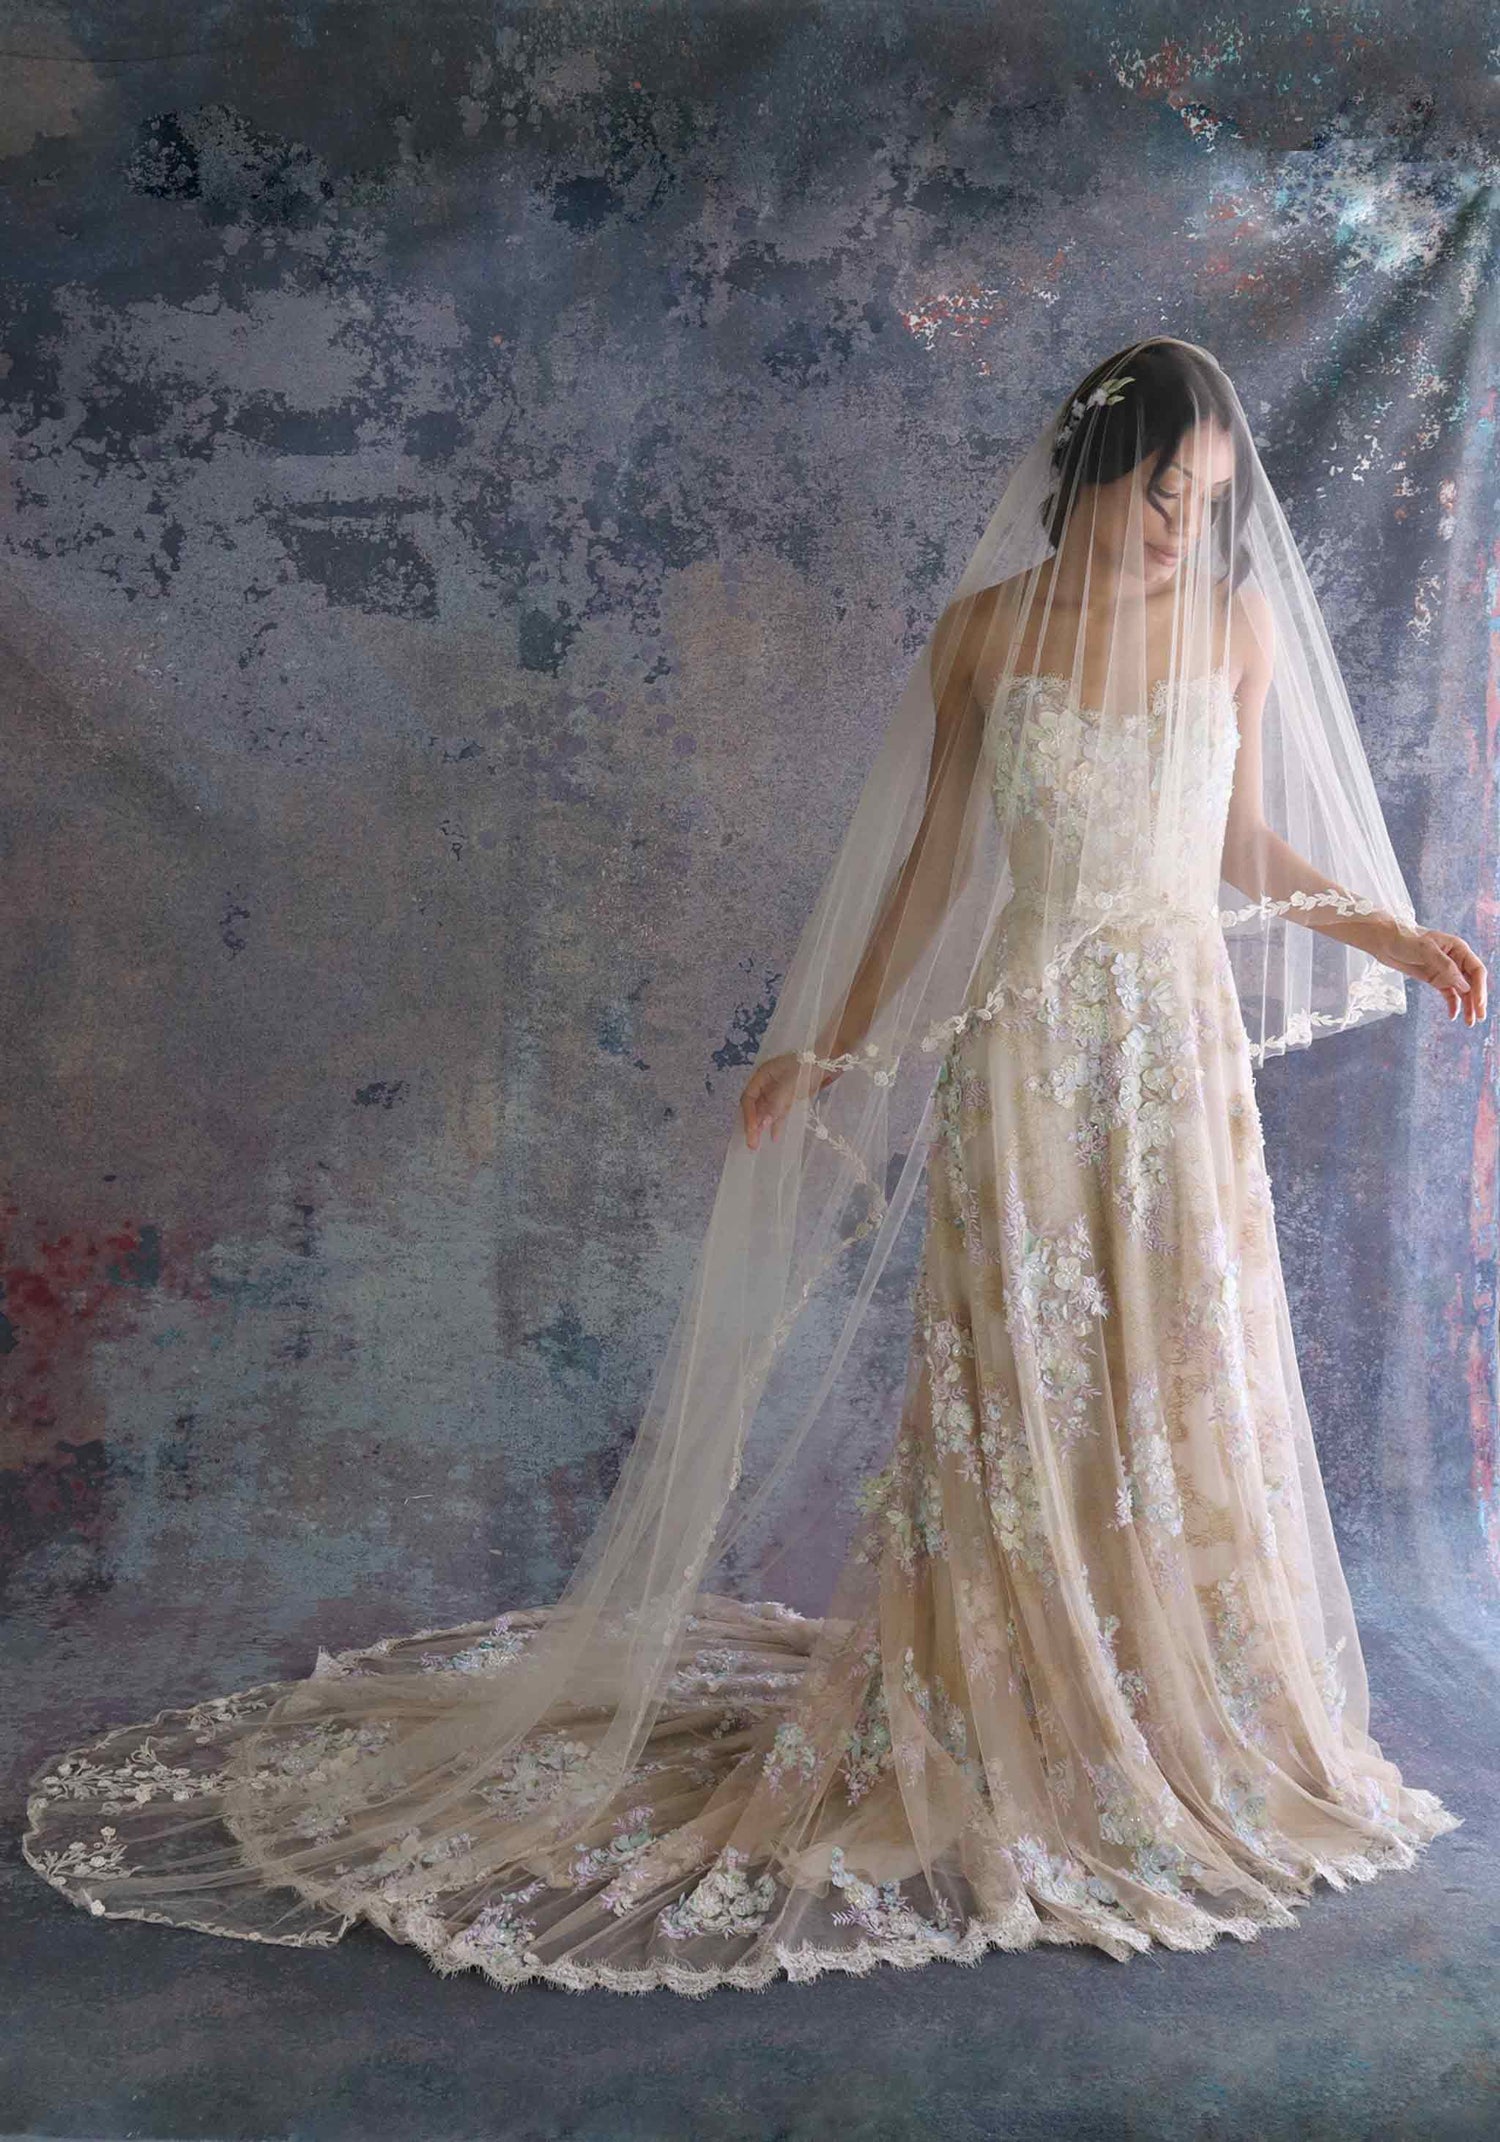 The Best Wedding Veils for Every Bridal Style